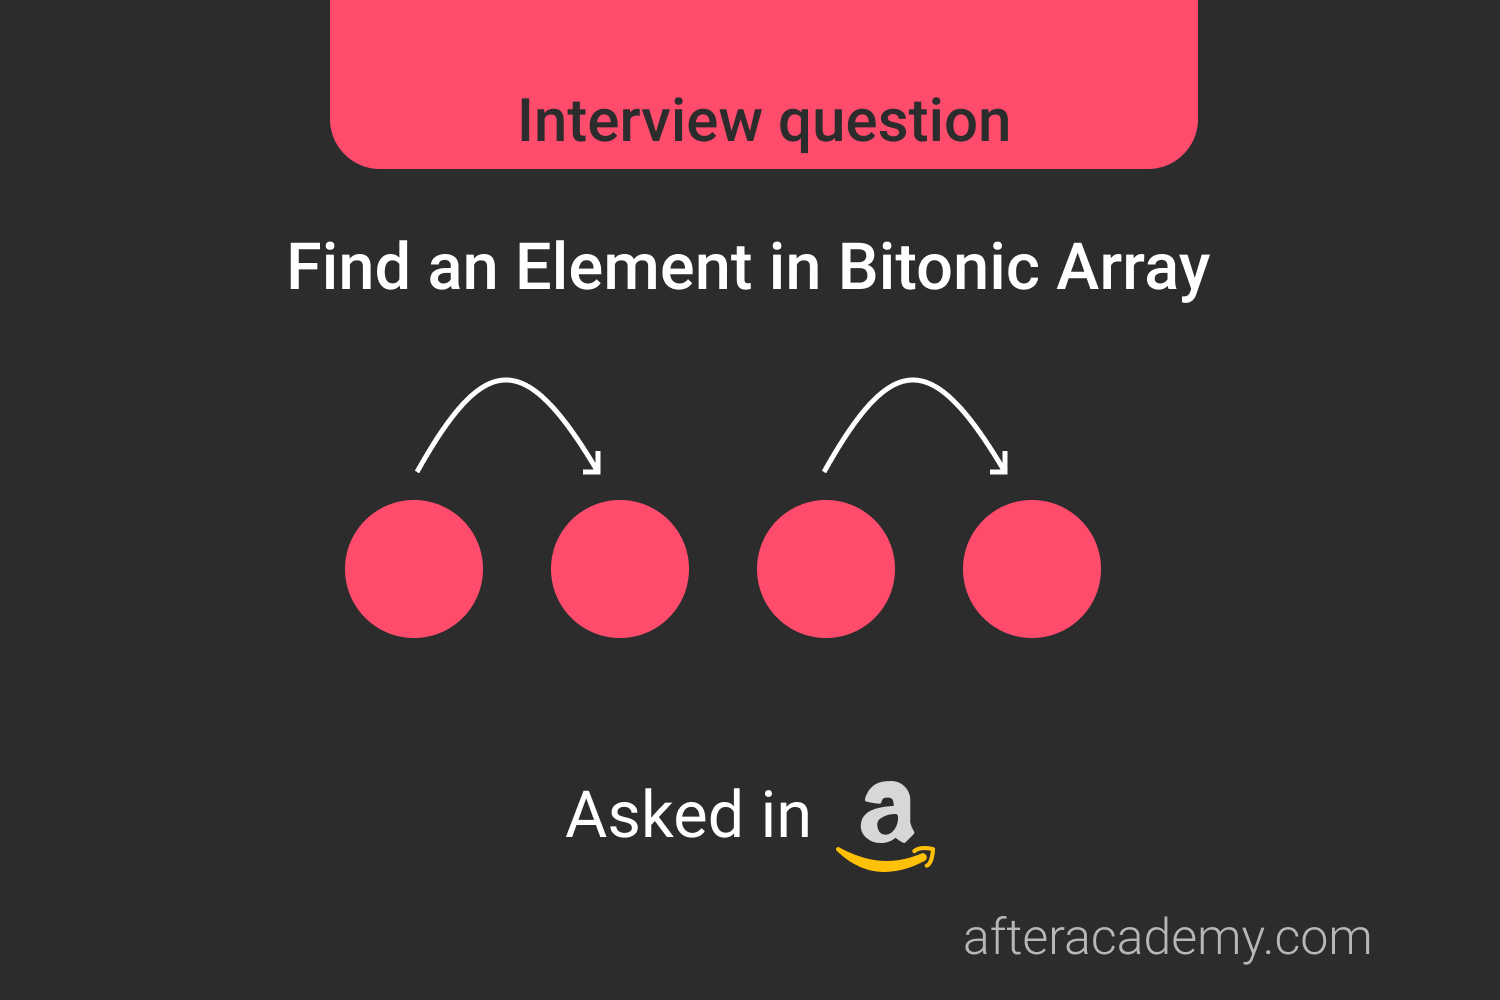 Find an Element In a Bitonic Array